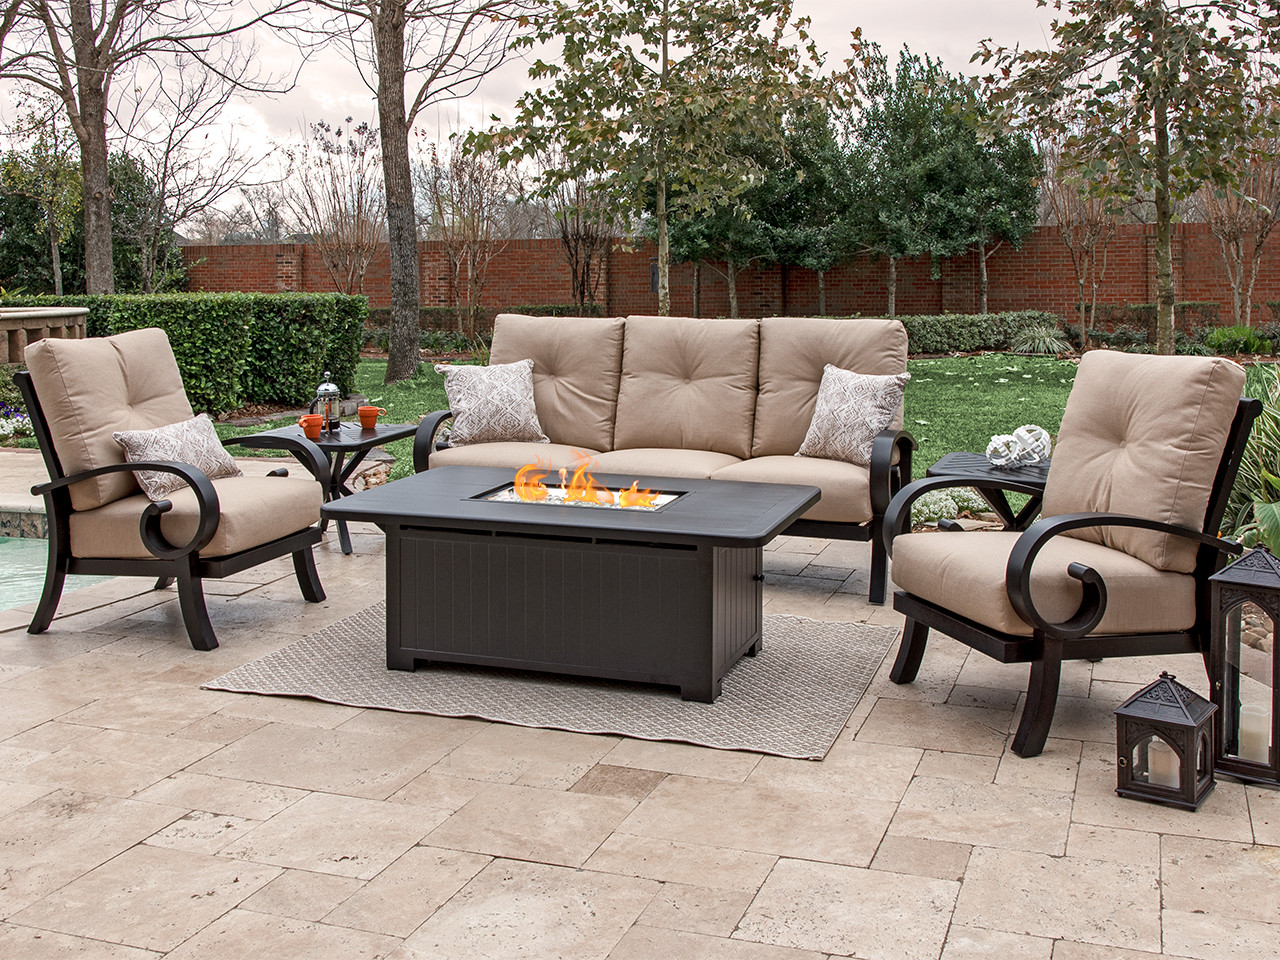 Solstice Aged Bronze Aluminum Flagship Stone 4 pc. Cushion Sofa Seating with 58 x 36 in. LP Fire Pit Coffee Table